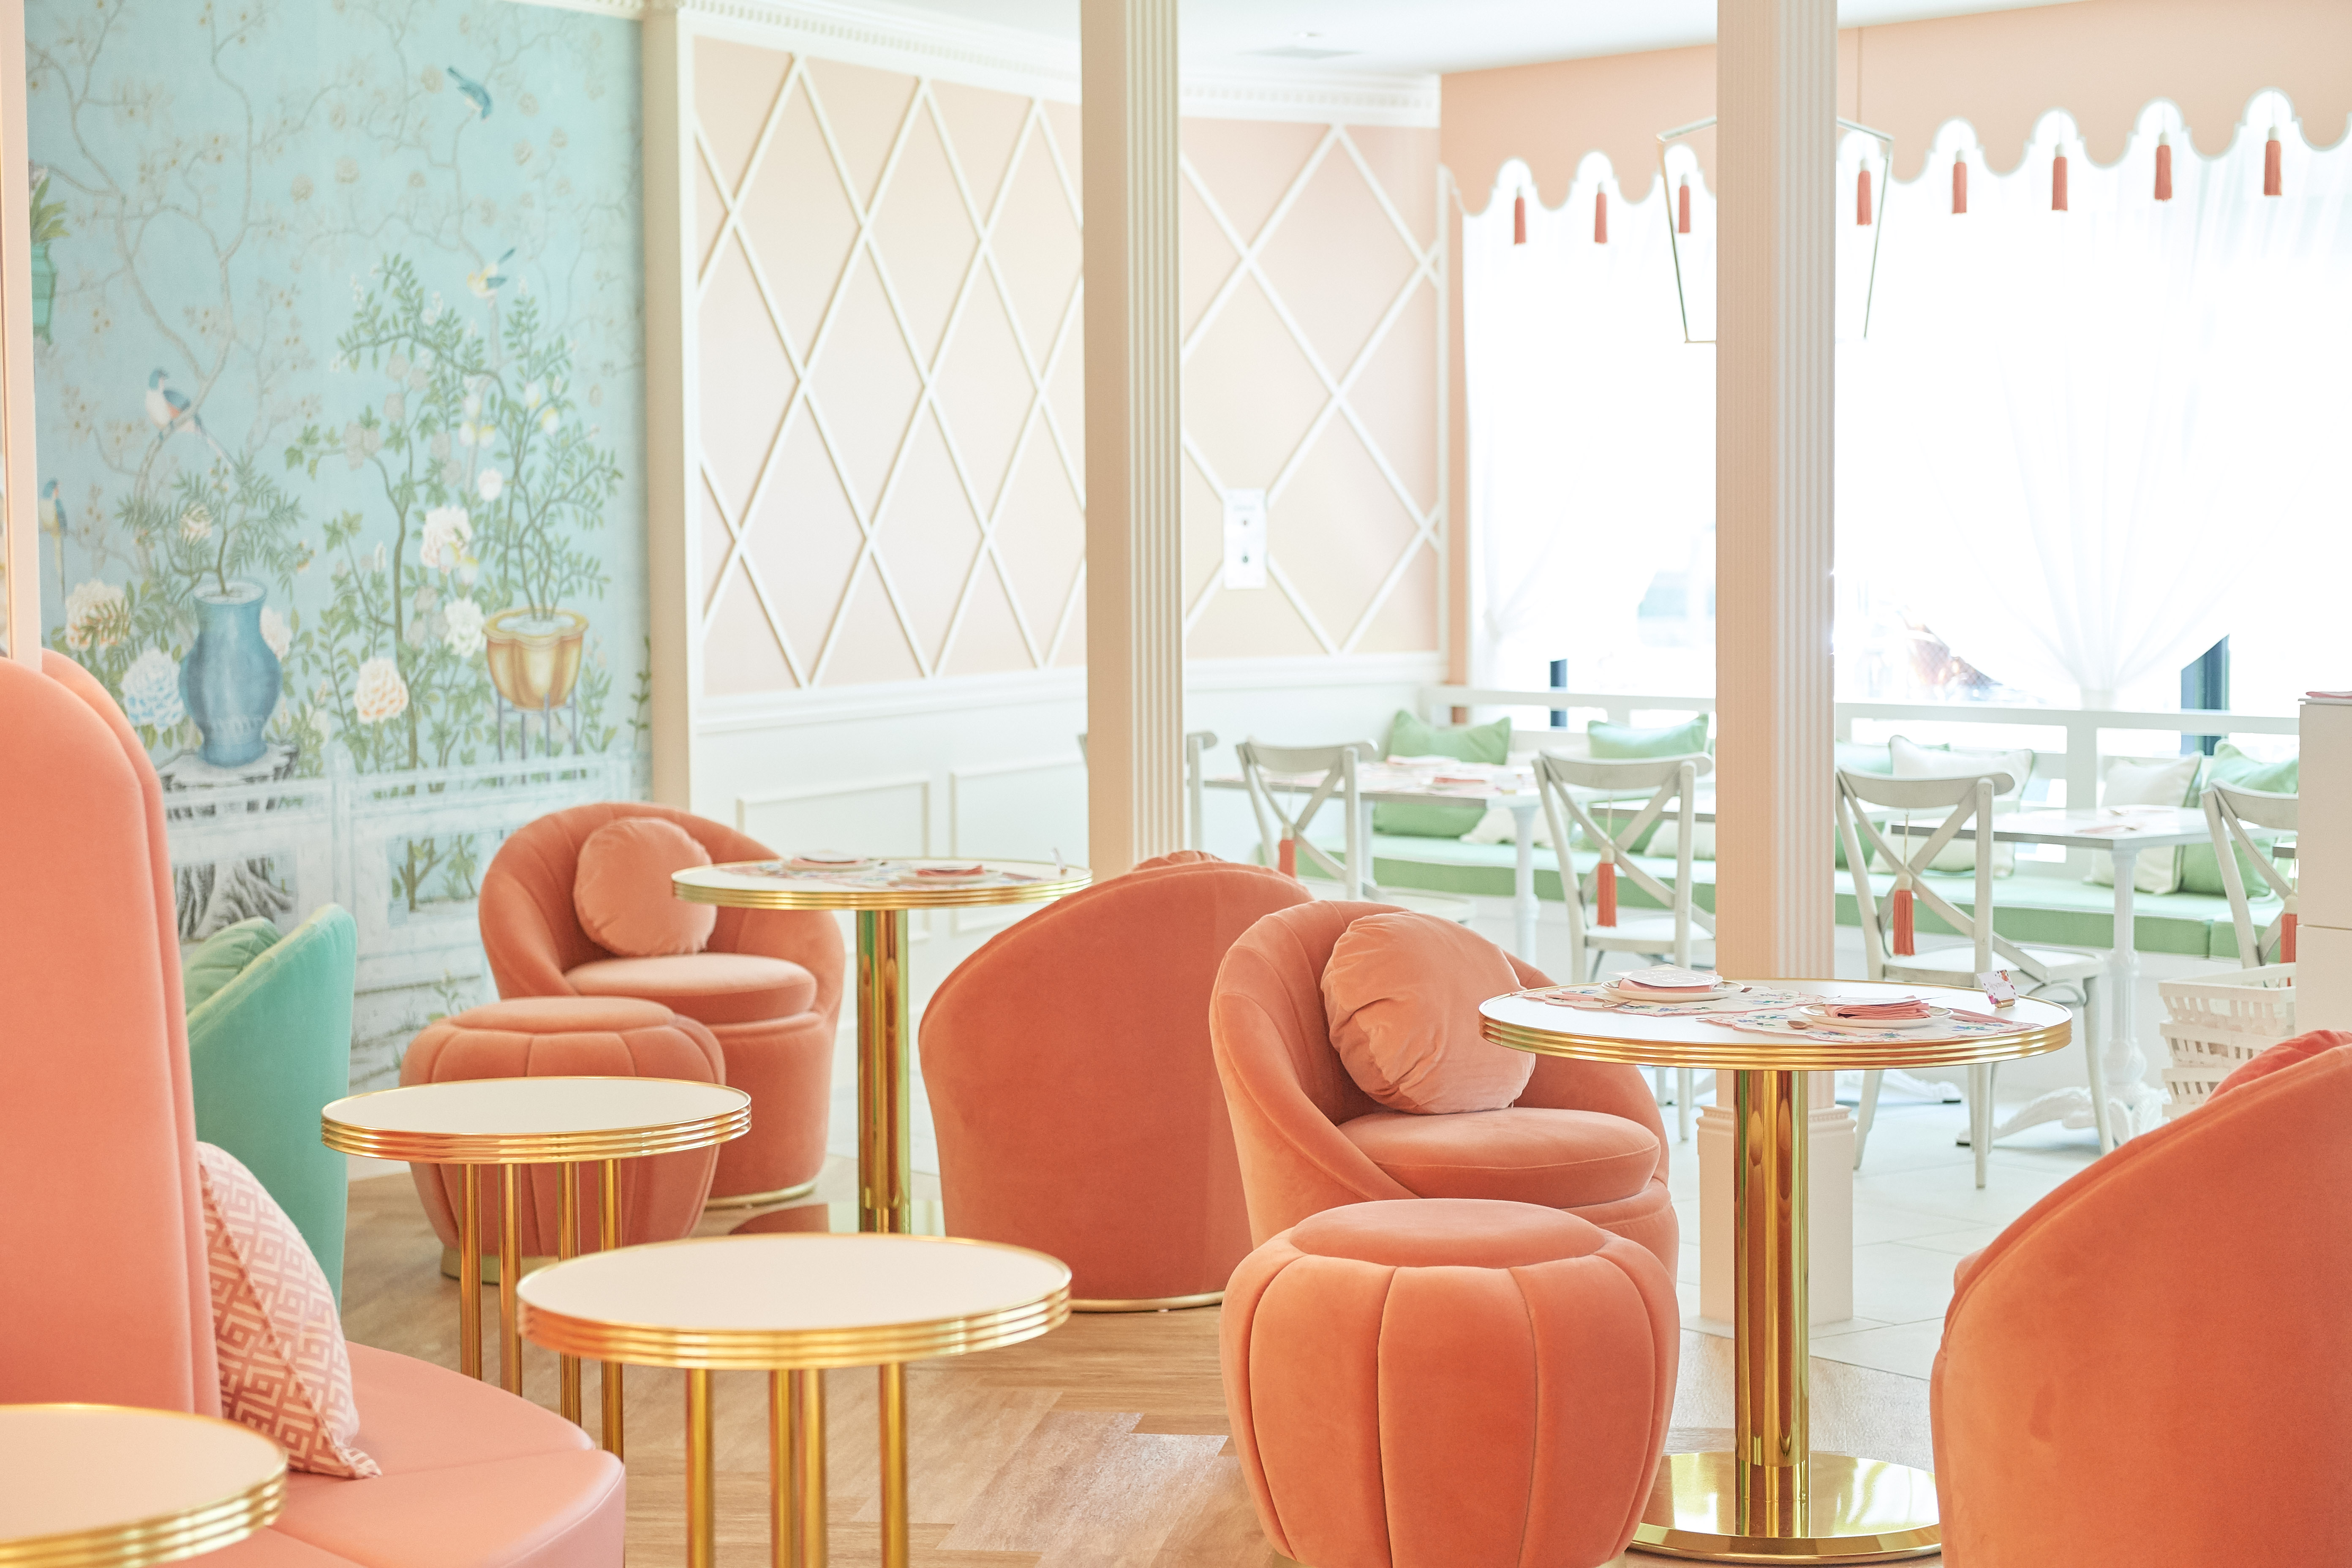 pale pink velvet chairs and stools inside a pastel-colored tea room